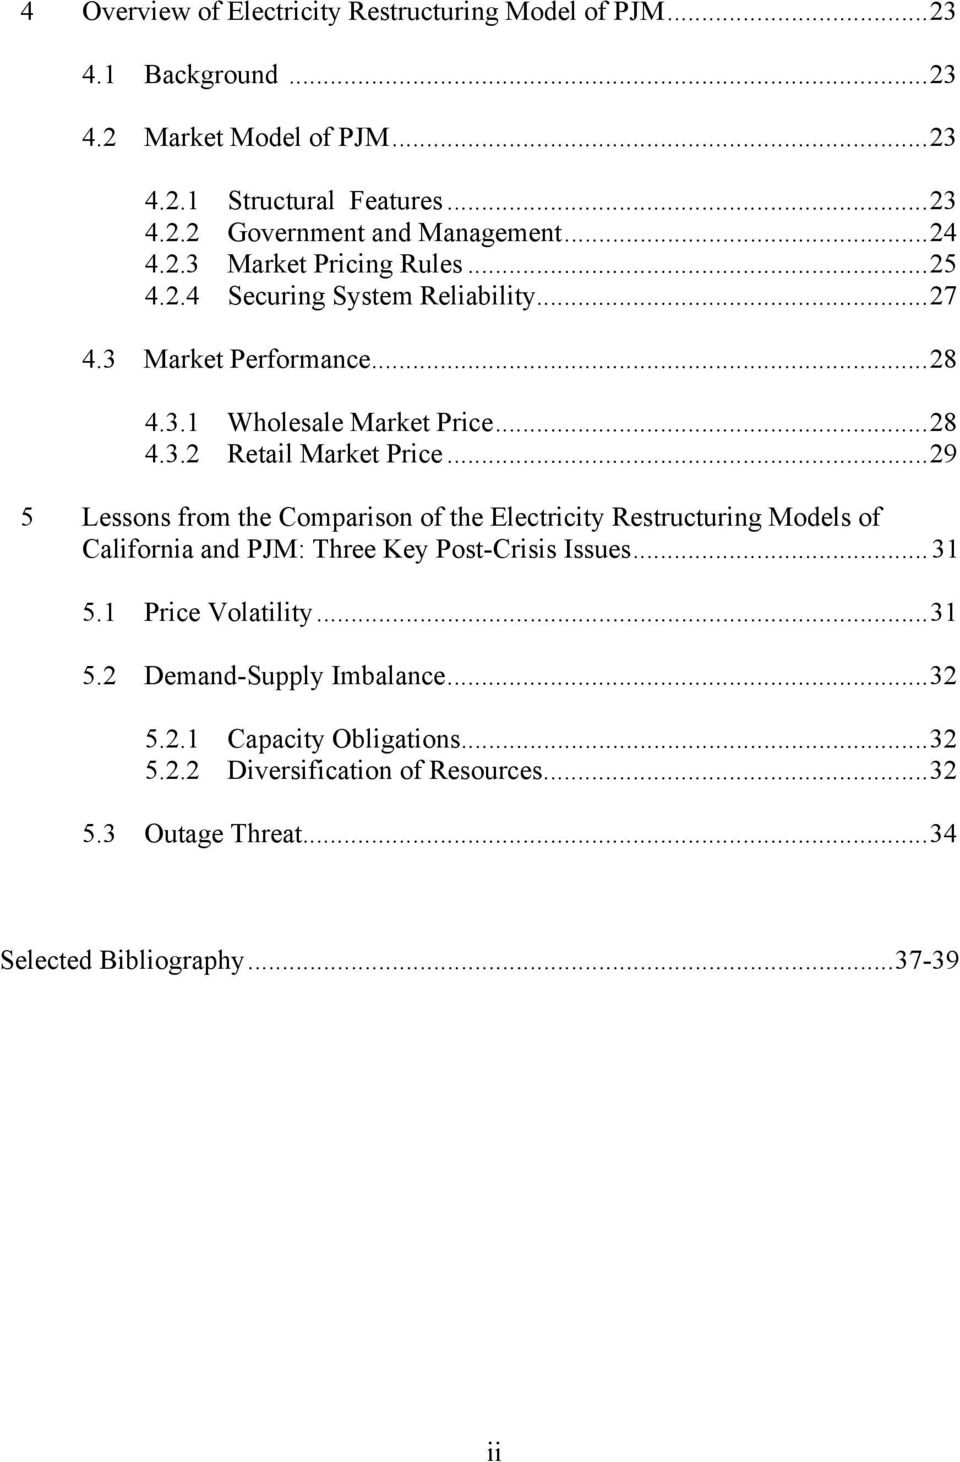 ..29 5 Lessons from the Comparison of the Electricity Restructuring Models of California and PJM: Three Key Post-Crisis Issues...31 5.1 Price Volatility...31 5.2 Demand-Supply Imbalance.